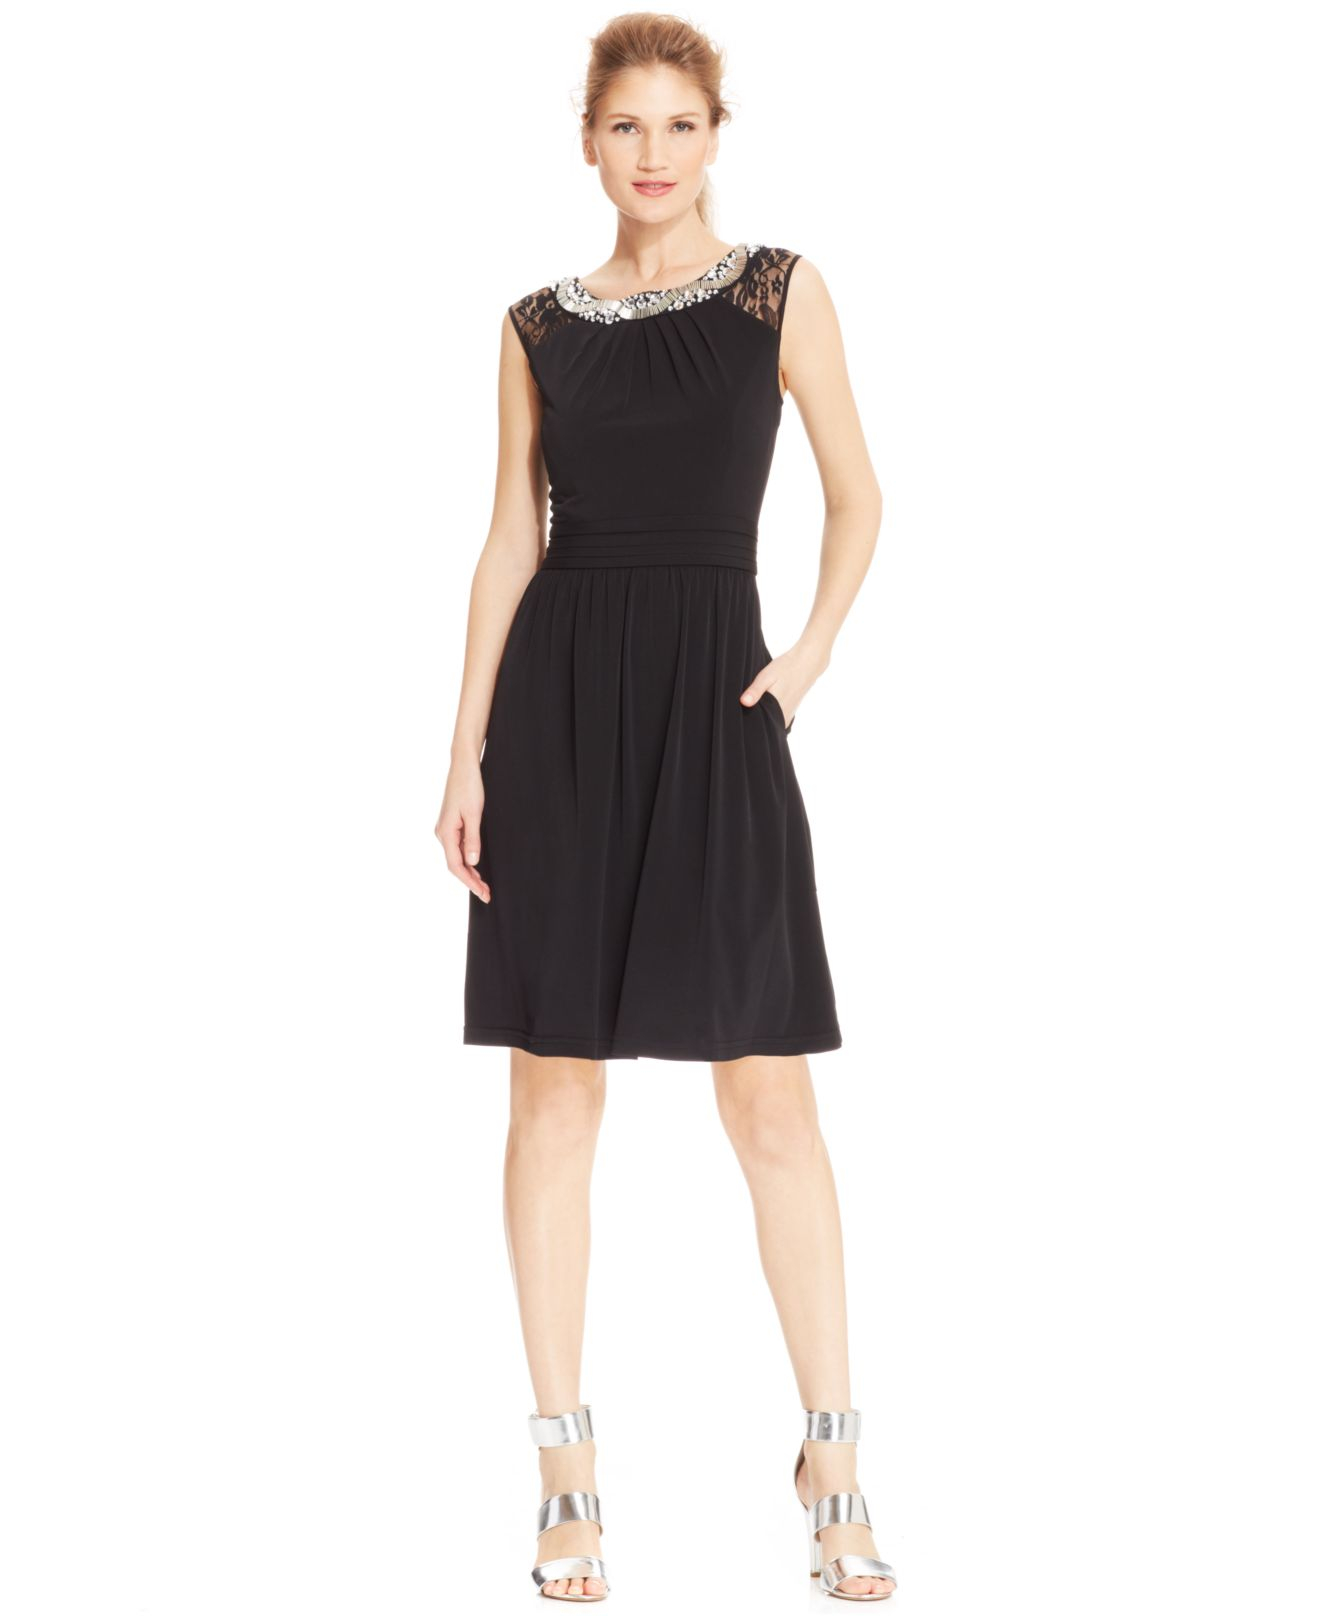 Lyst - Ellen Tracy Illusion-Lace Embellished Dress in Black